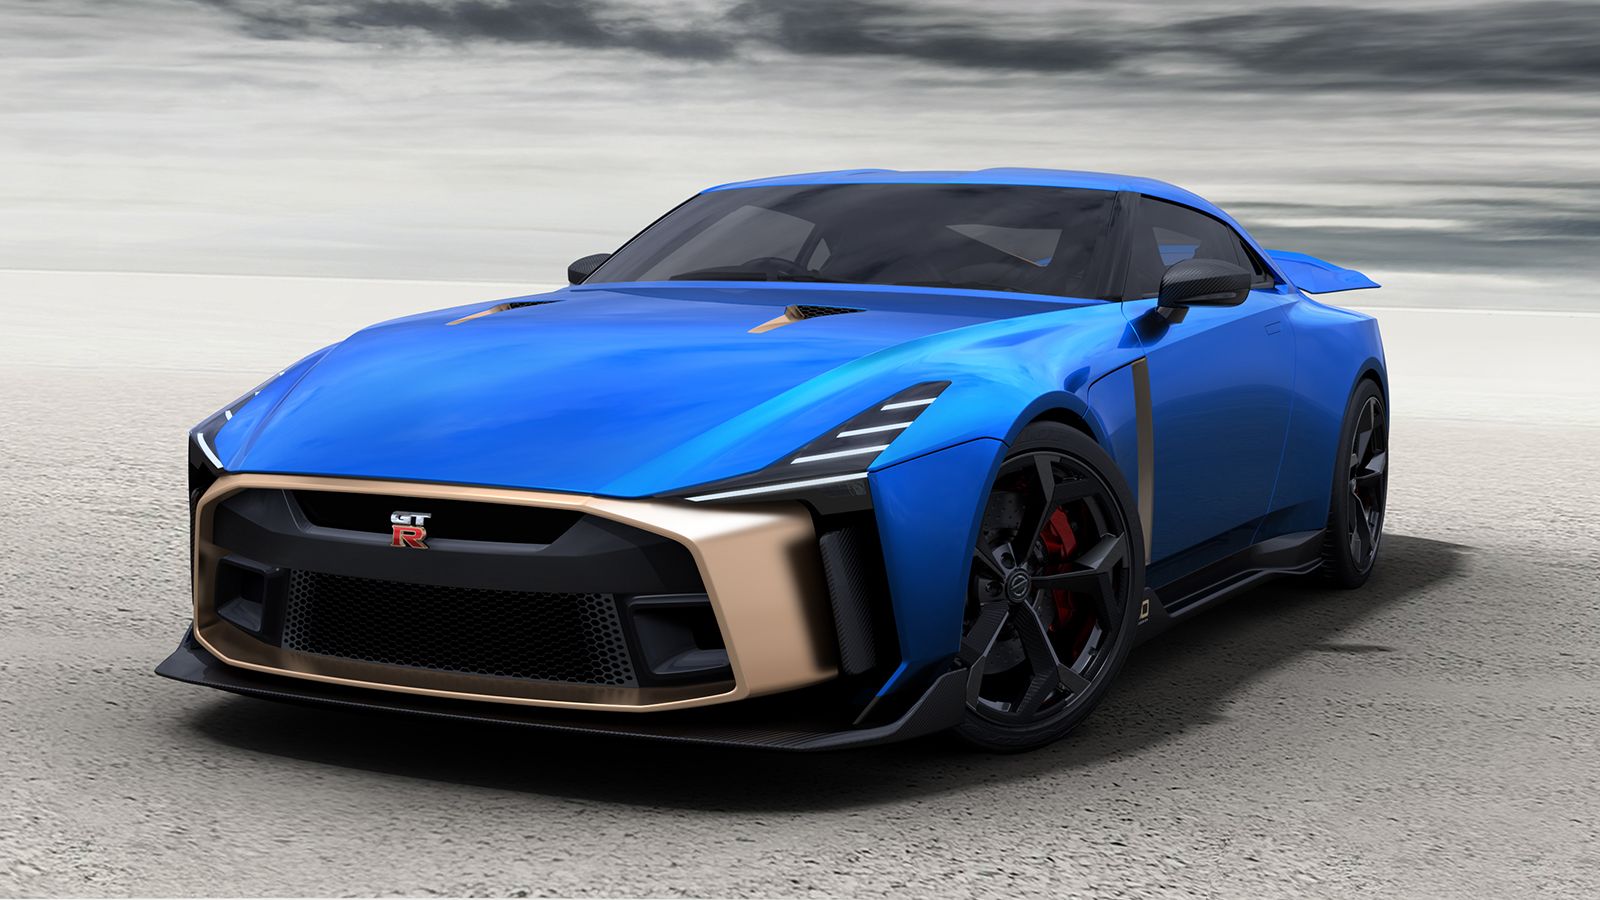 Image Gallery of the Nissan GT-R50 Concept – Robb Report